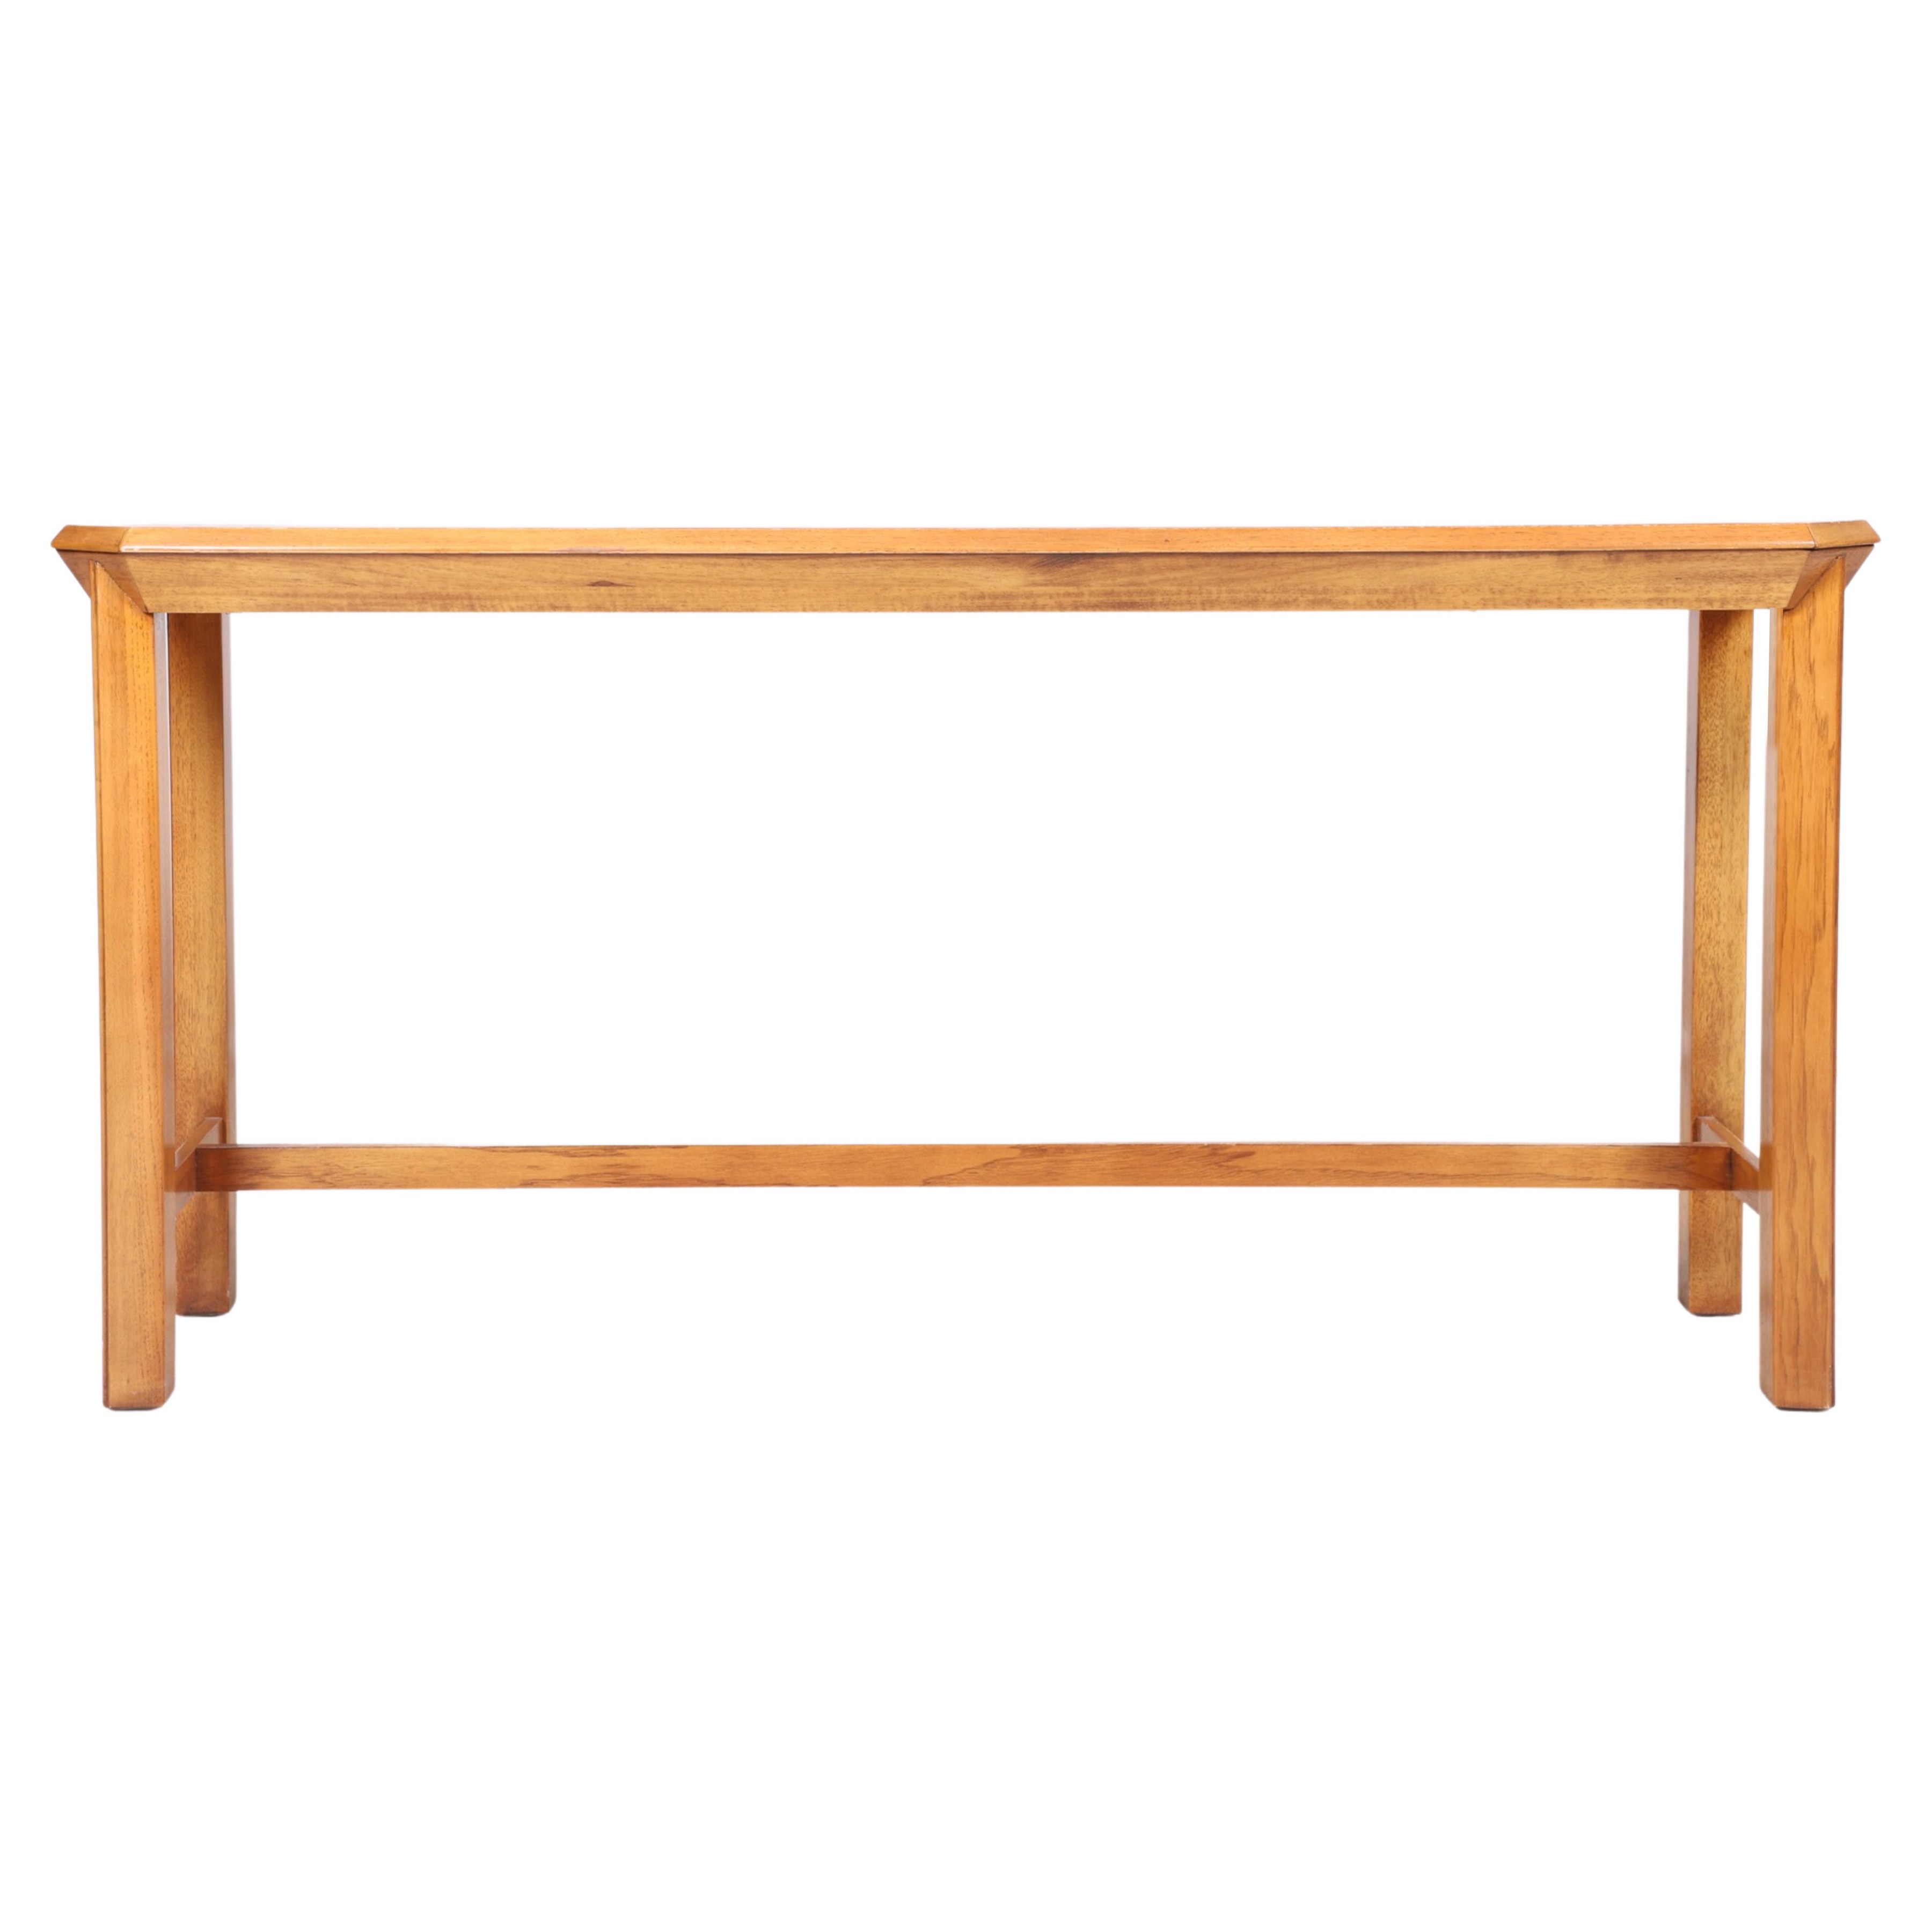 Drexel 2-tier glass top console table,